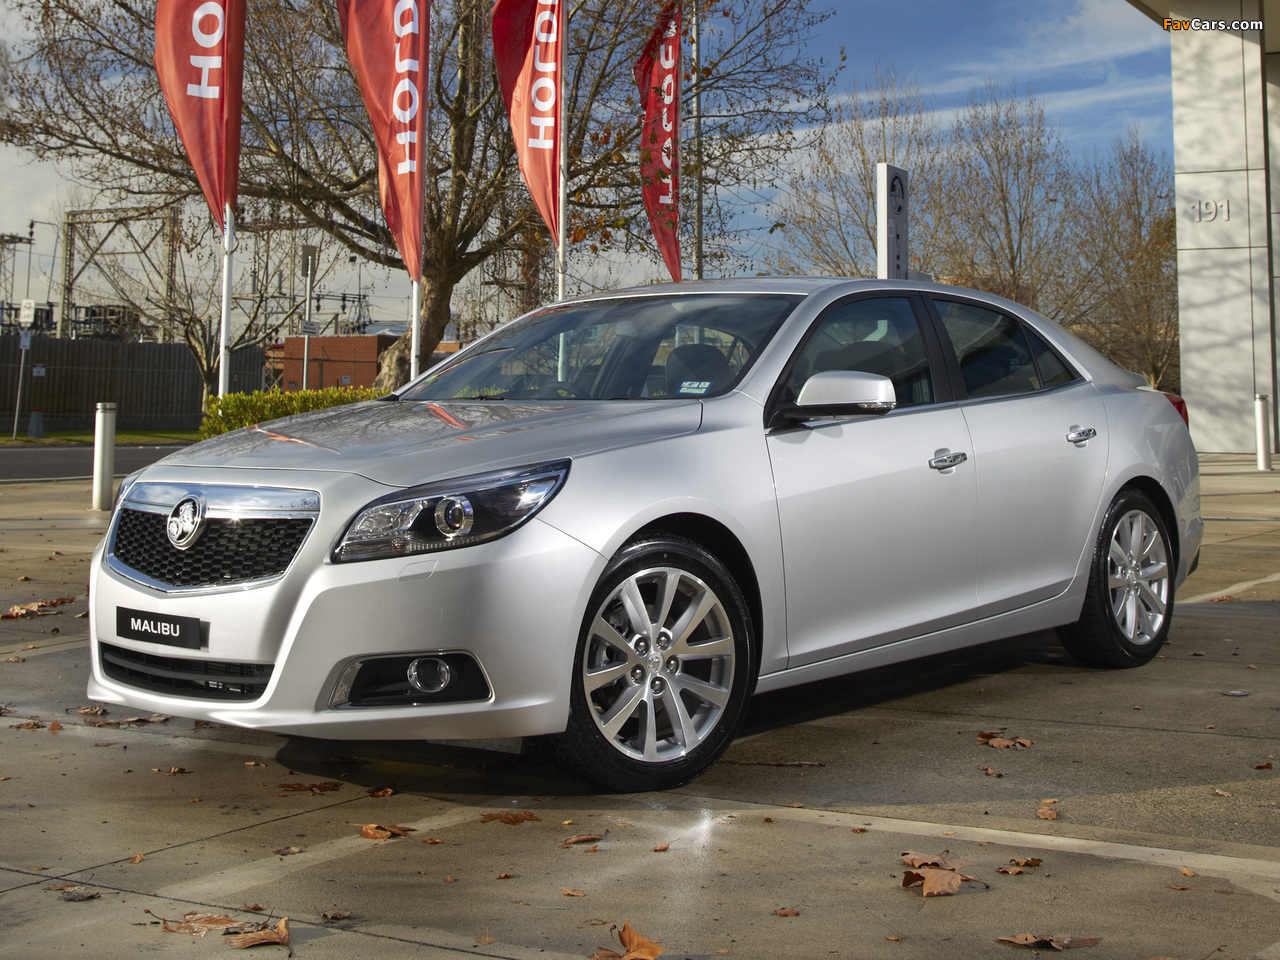 Holden Malibu CDX 2013 pictures (1280 x 960)